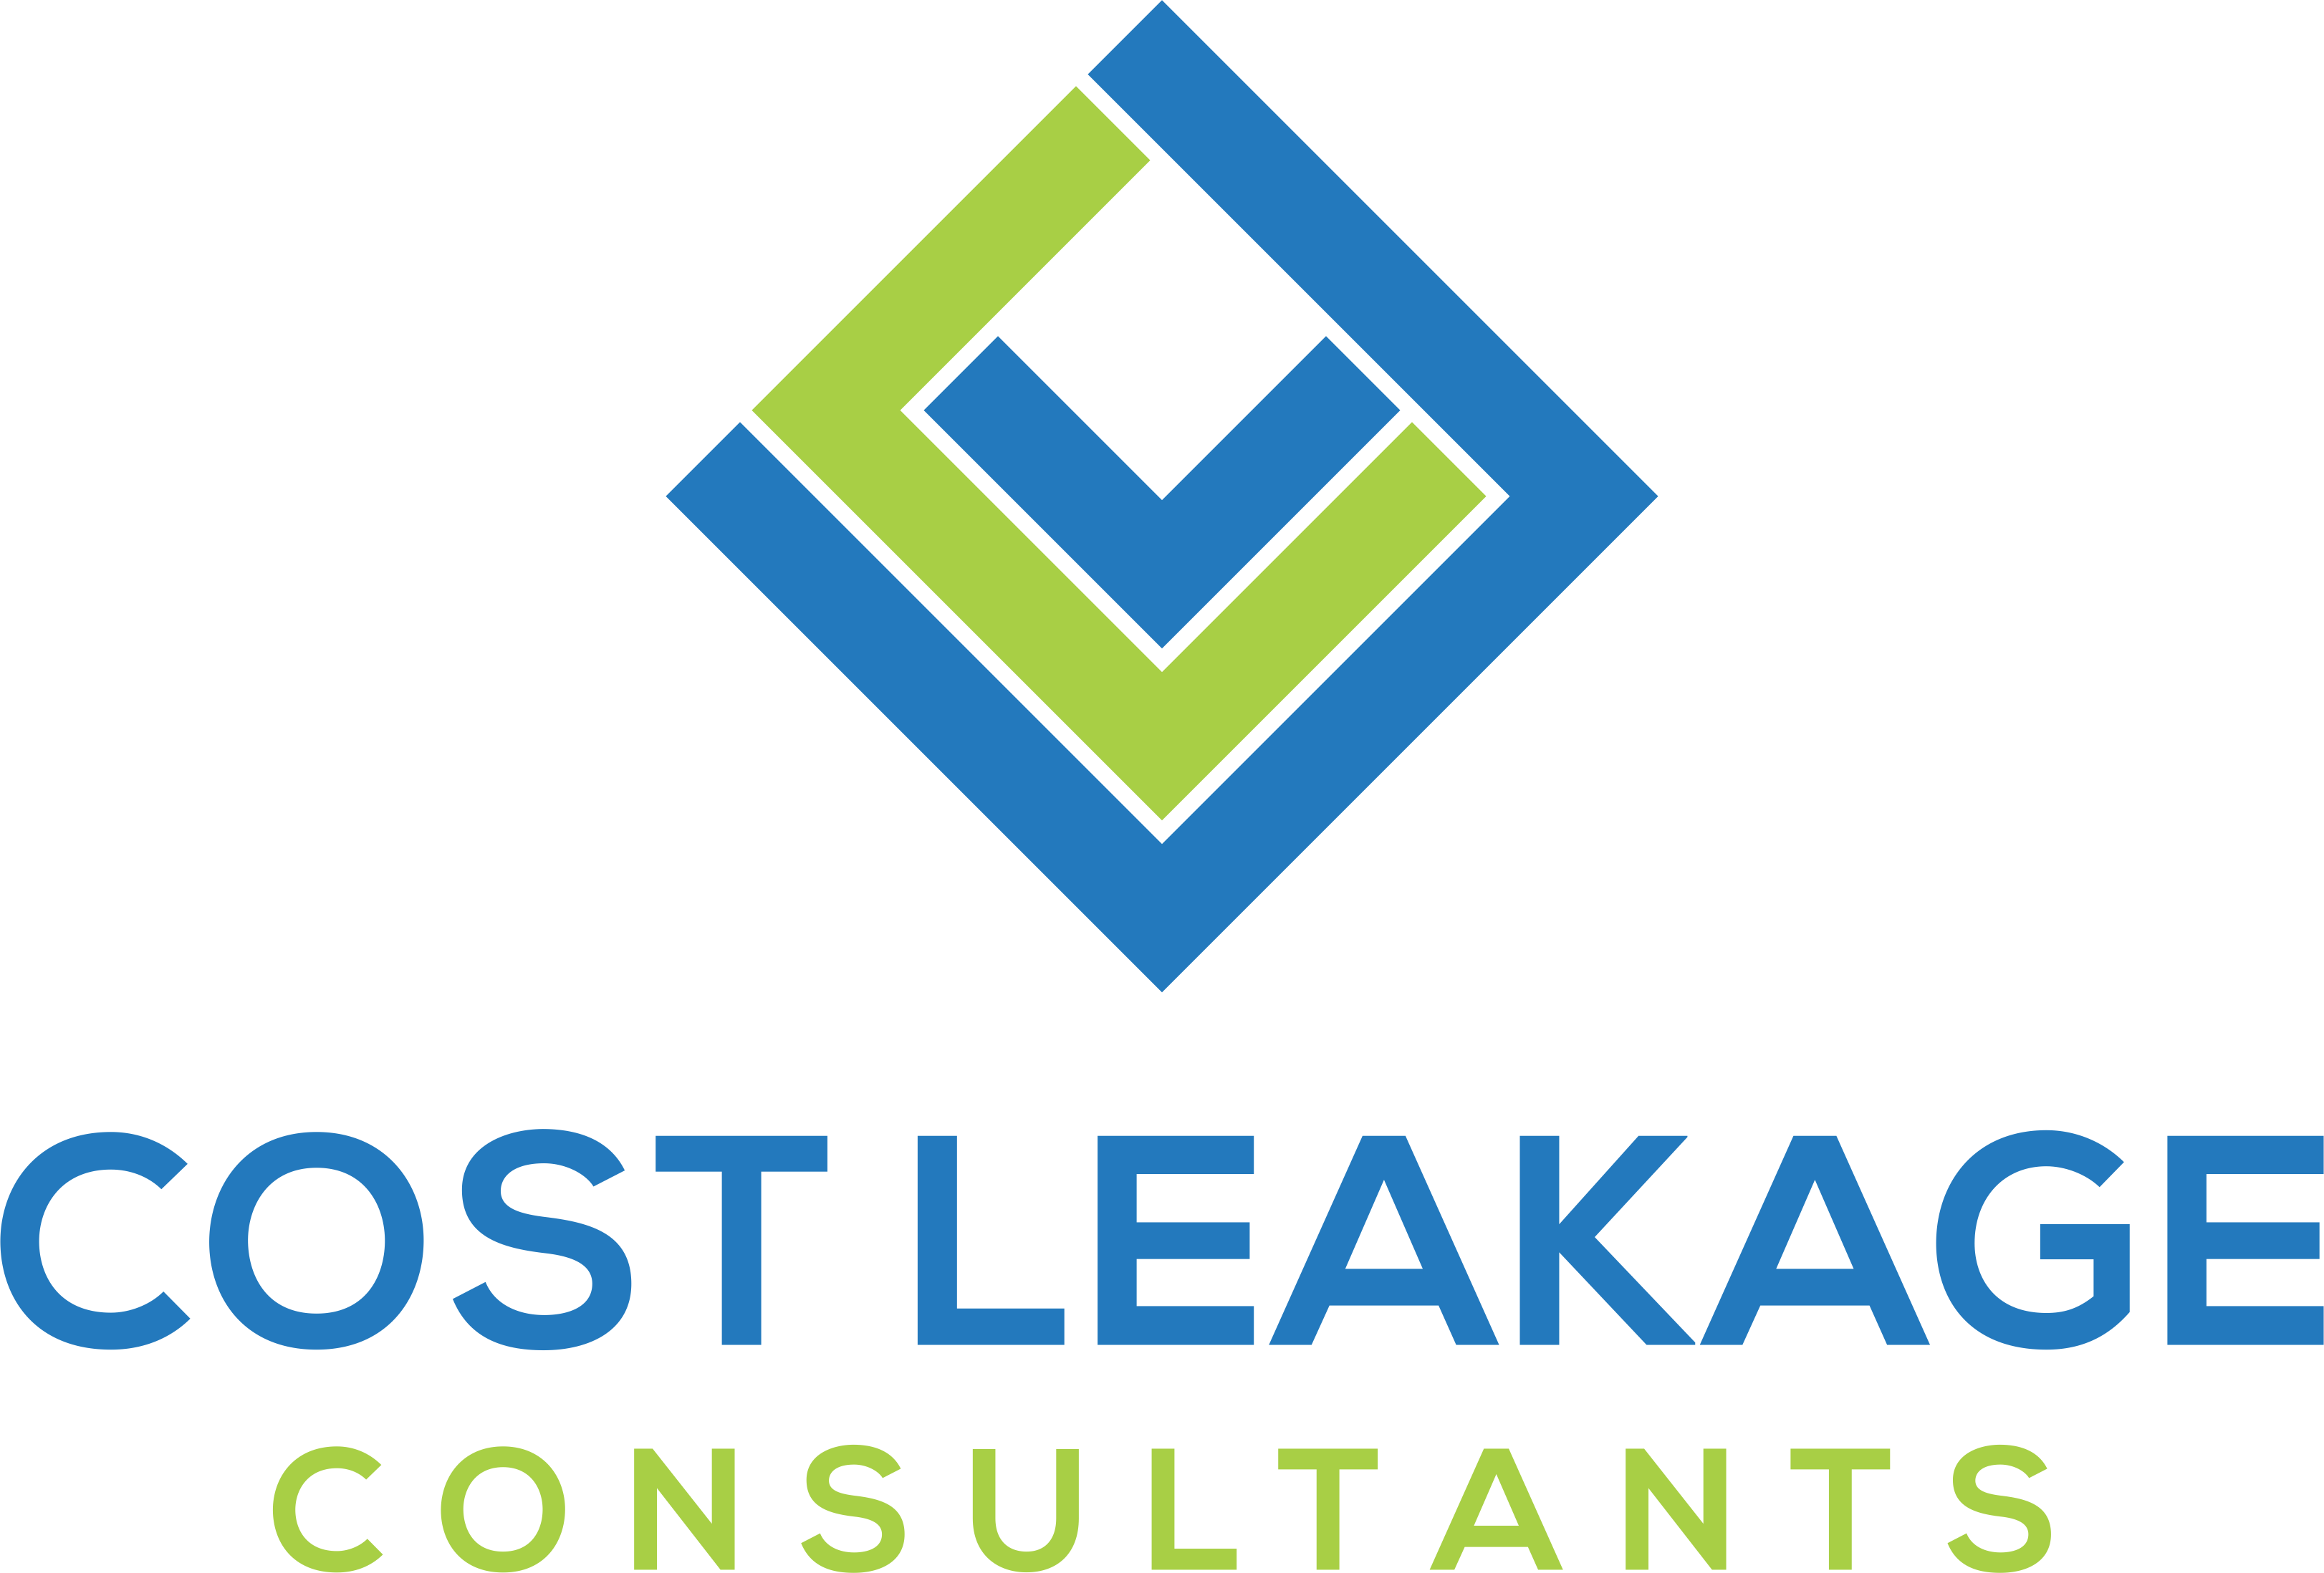 Cost Leakage Consultants